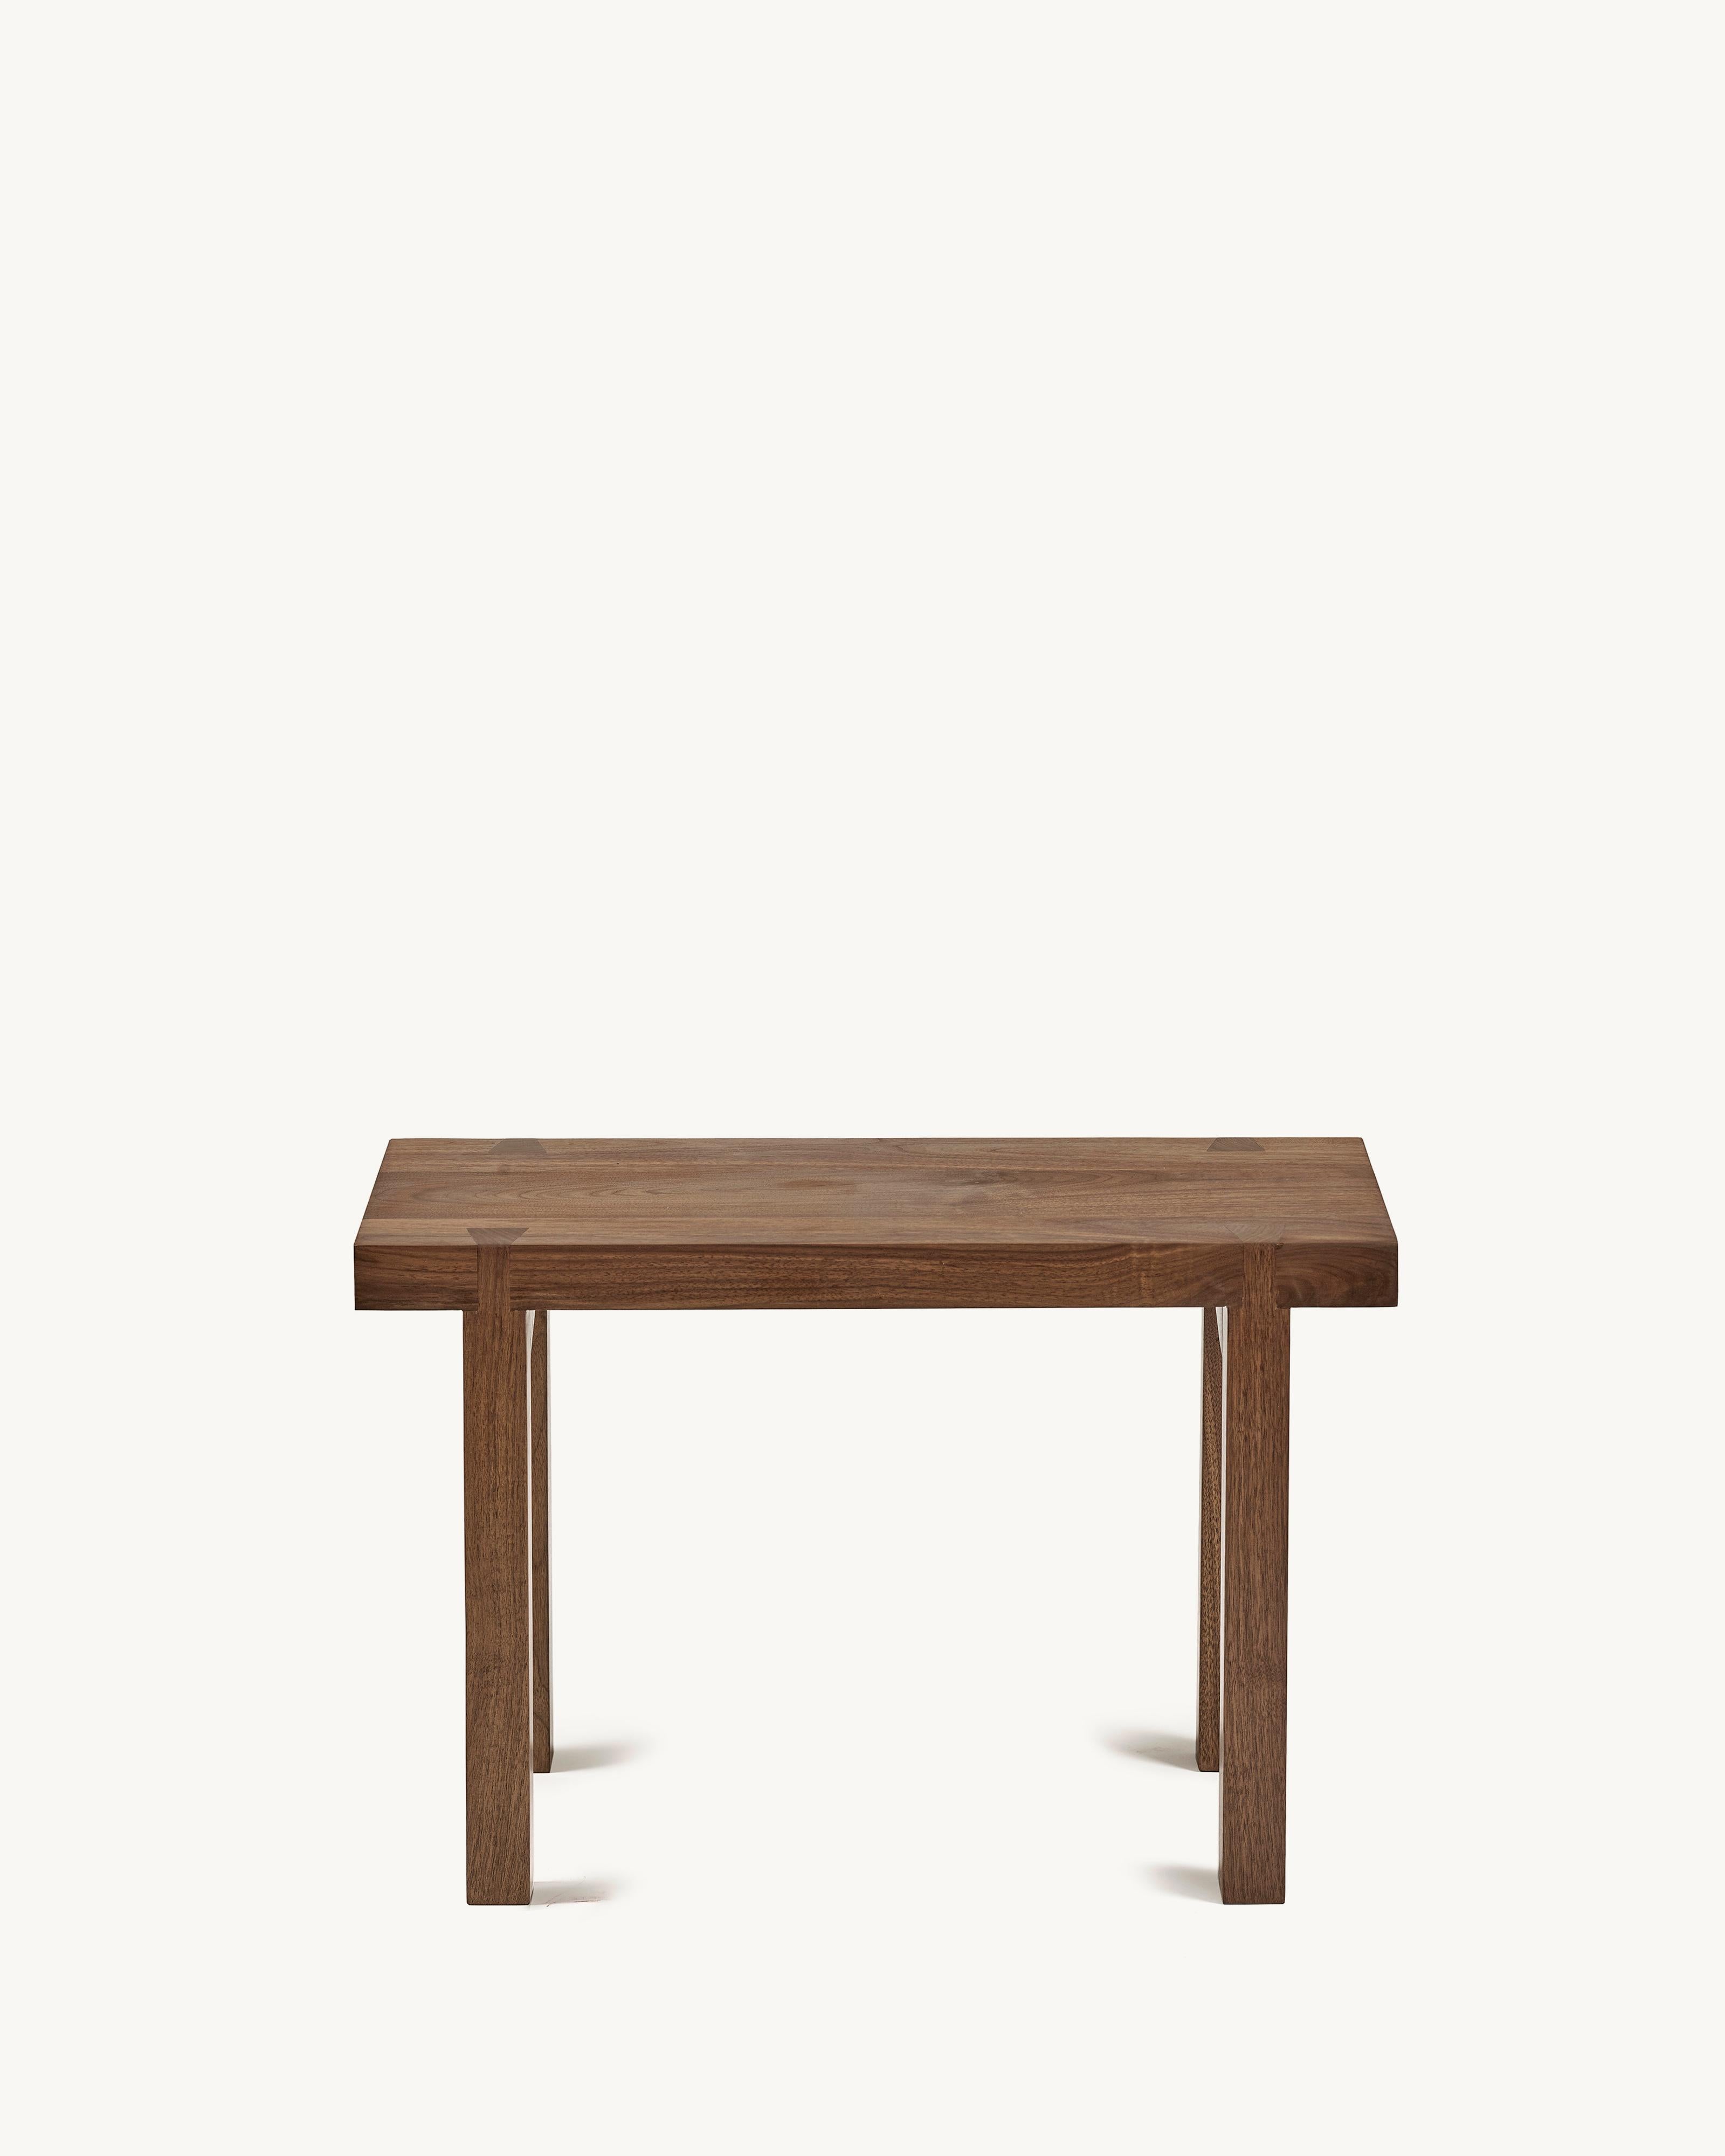 Belgian Contemporary Bench in Walnut 'Solid' by Atelier 365 x Valerie Objects, Small For Sale